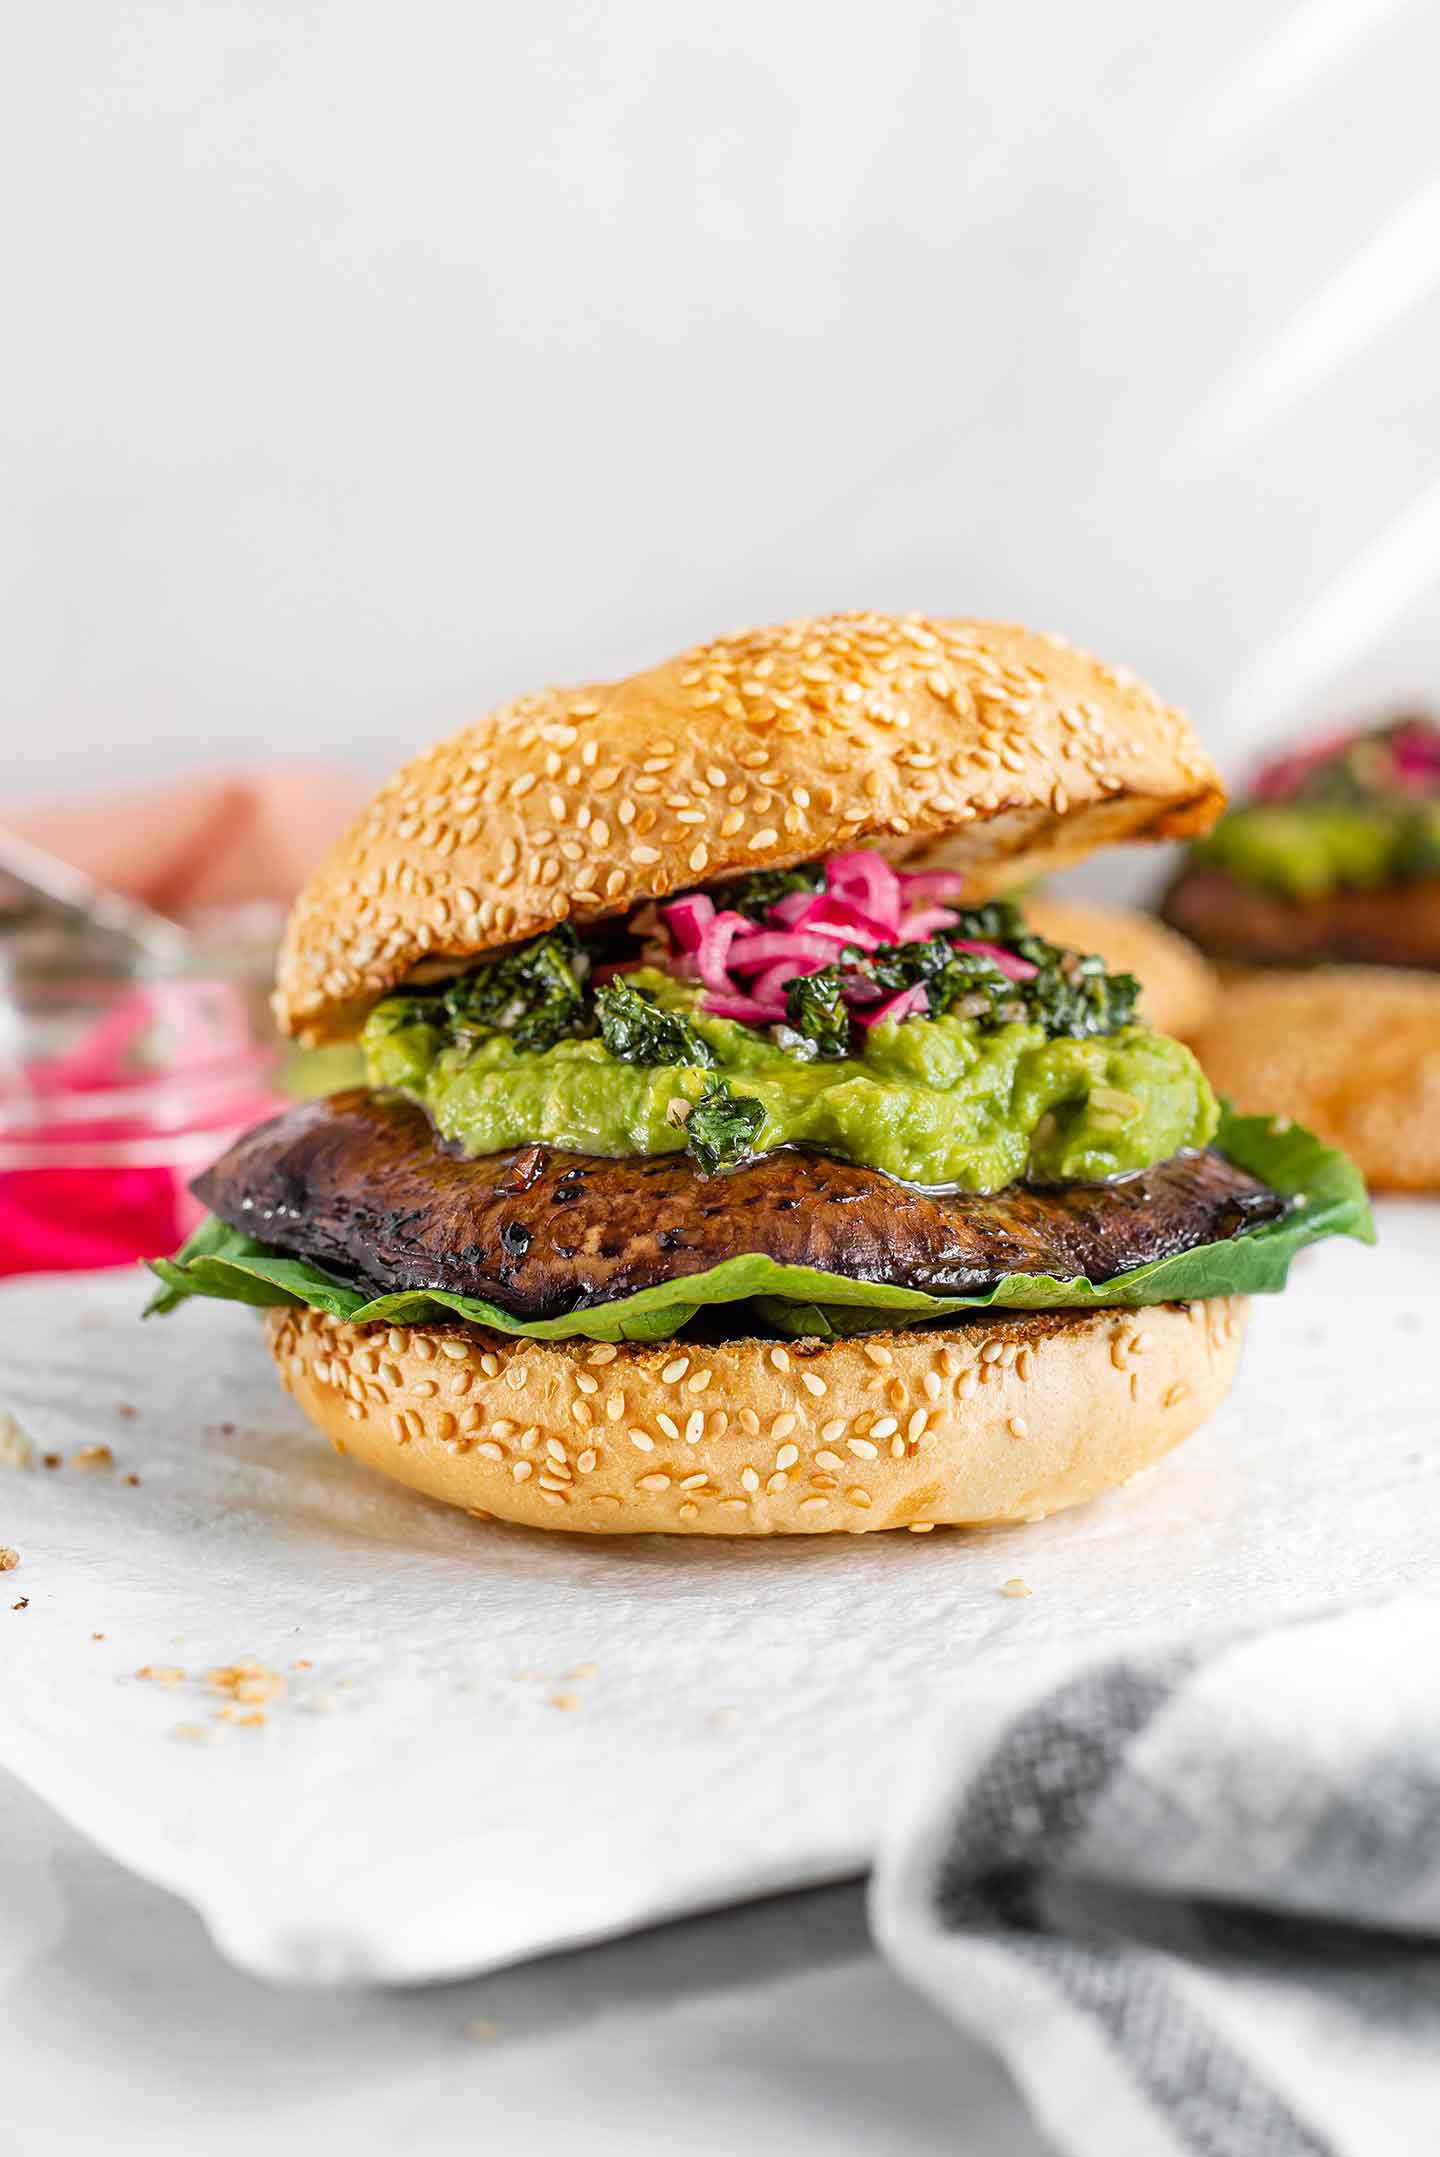 Side view of a burger with romaine lettuce, a portobello mushroom, a generous amount of avocado mash and topped with chimichurri and pickled red onion.